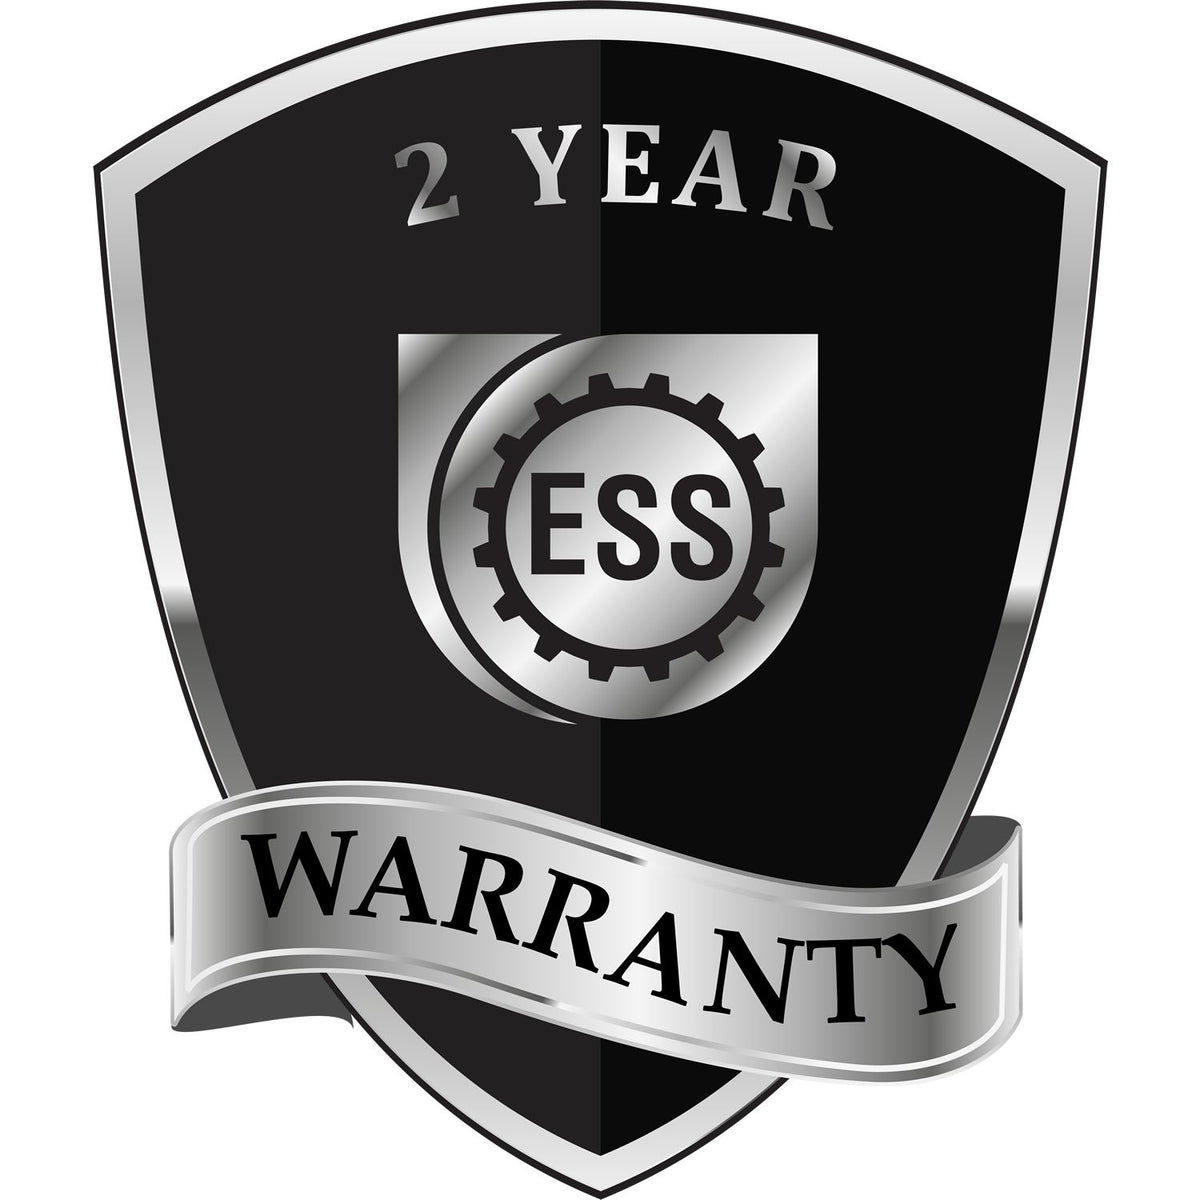 A black and silver badge or emblem showing warranty information for the Gift South Dakota Architect Seal